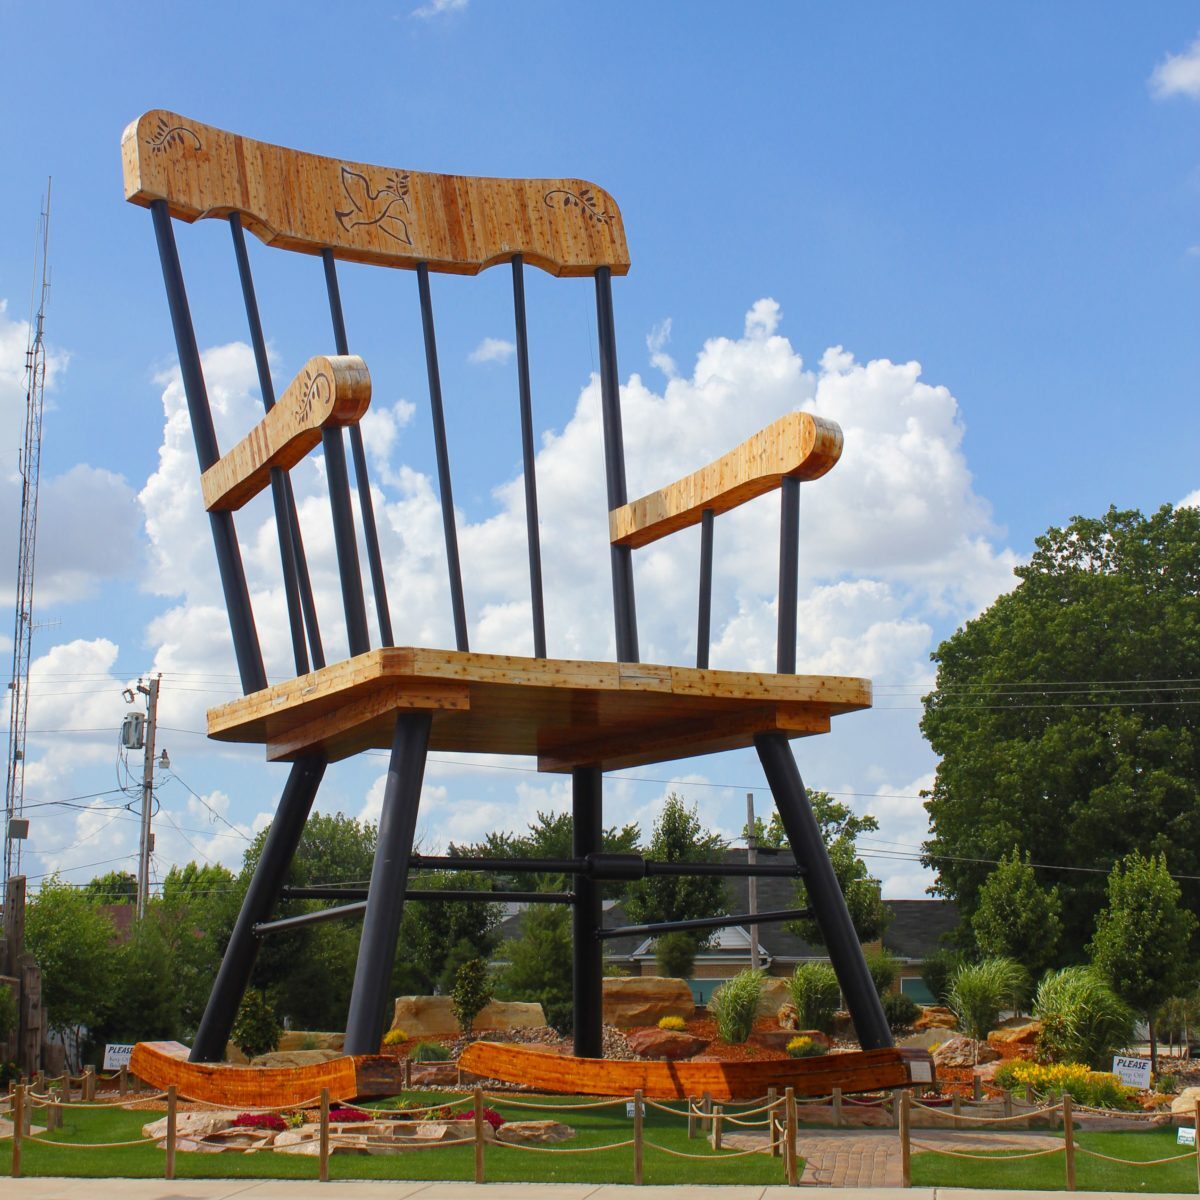 Who wouldn't want to sit on the World's Largest Rocking Chair in Casey IL (population 2264)